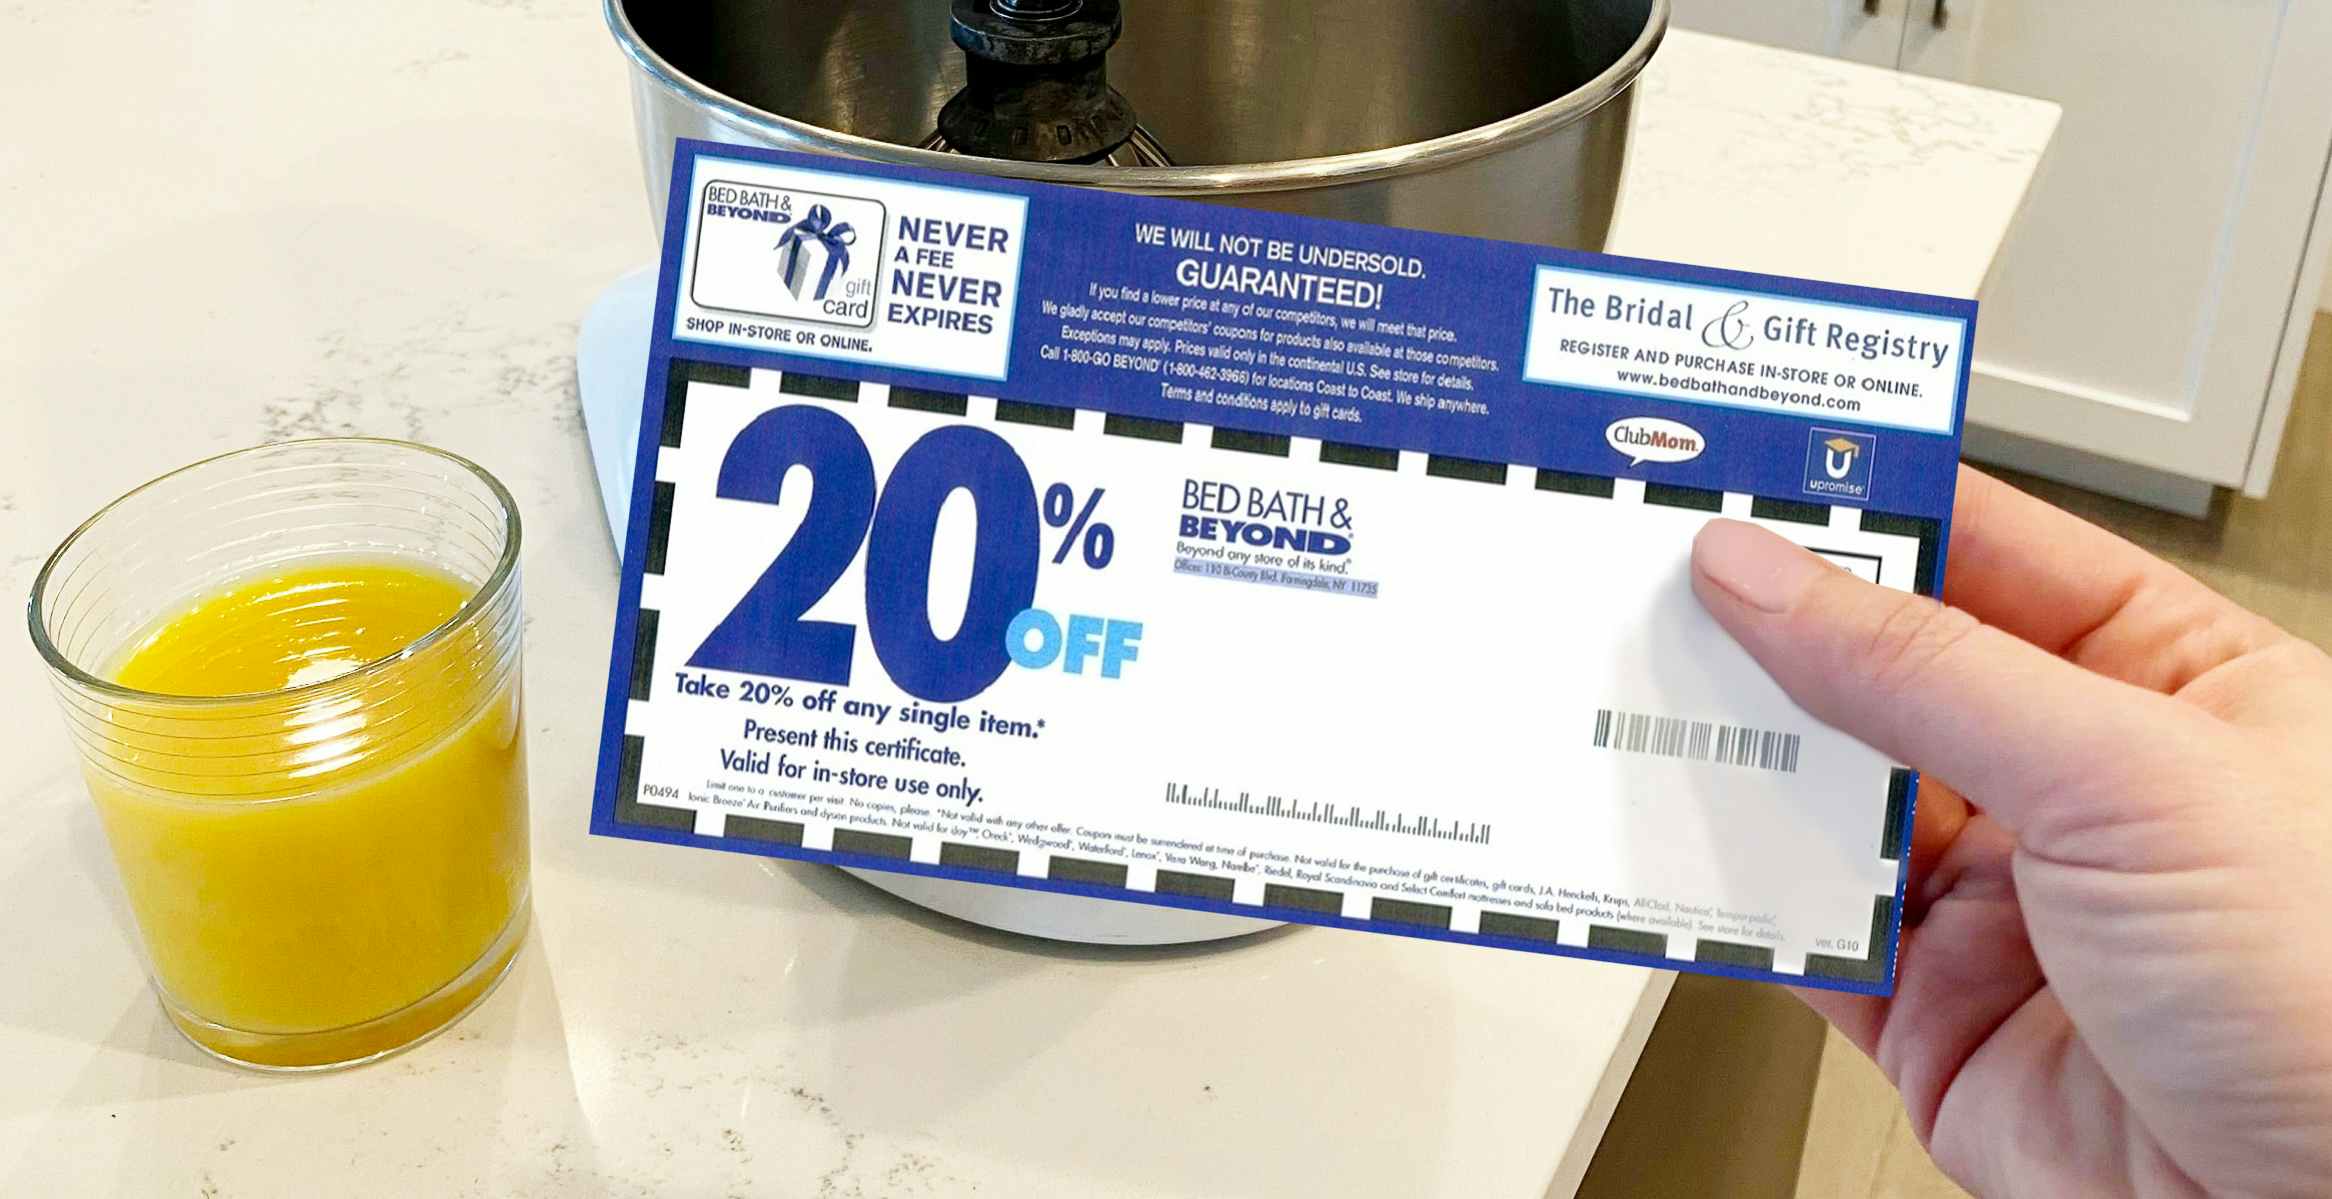 A Bed Bath and Beyond coupon in front of a Kitchenaid